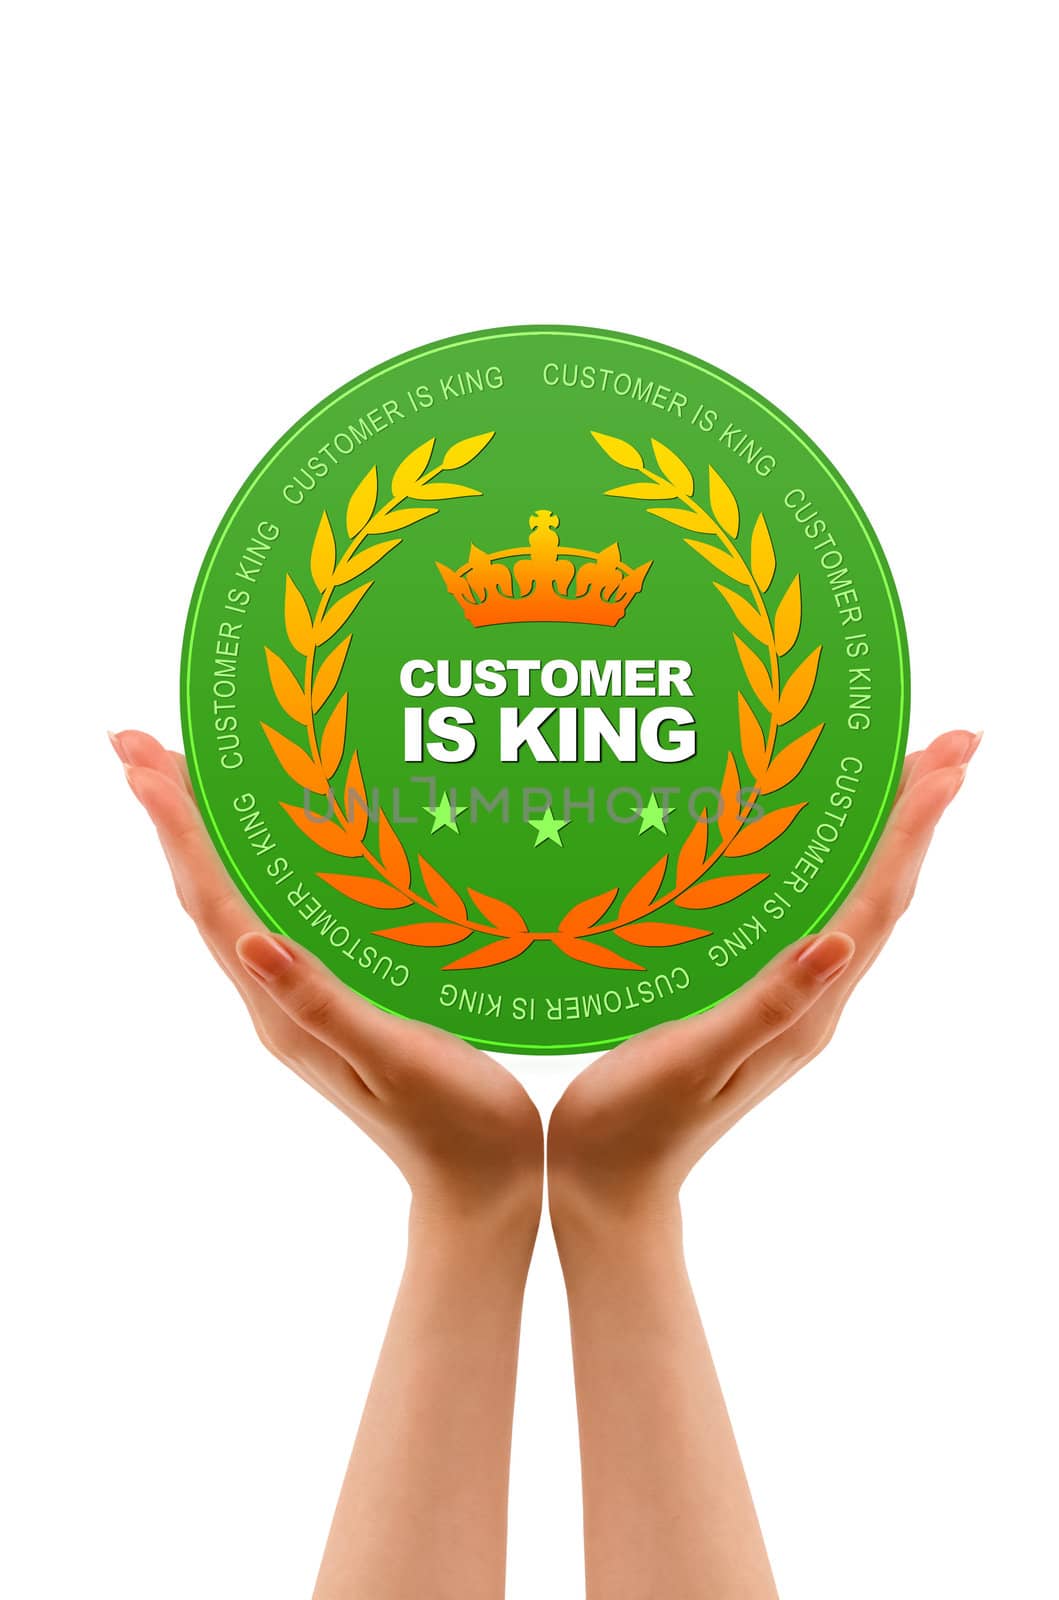 Hands holding a Customer is King Icon on white background.